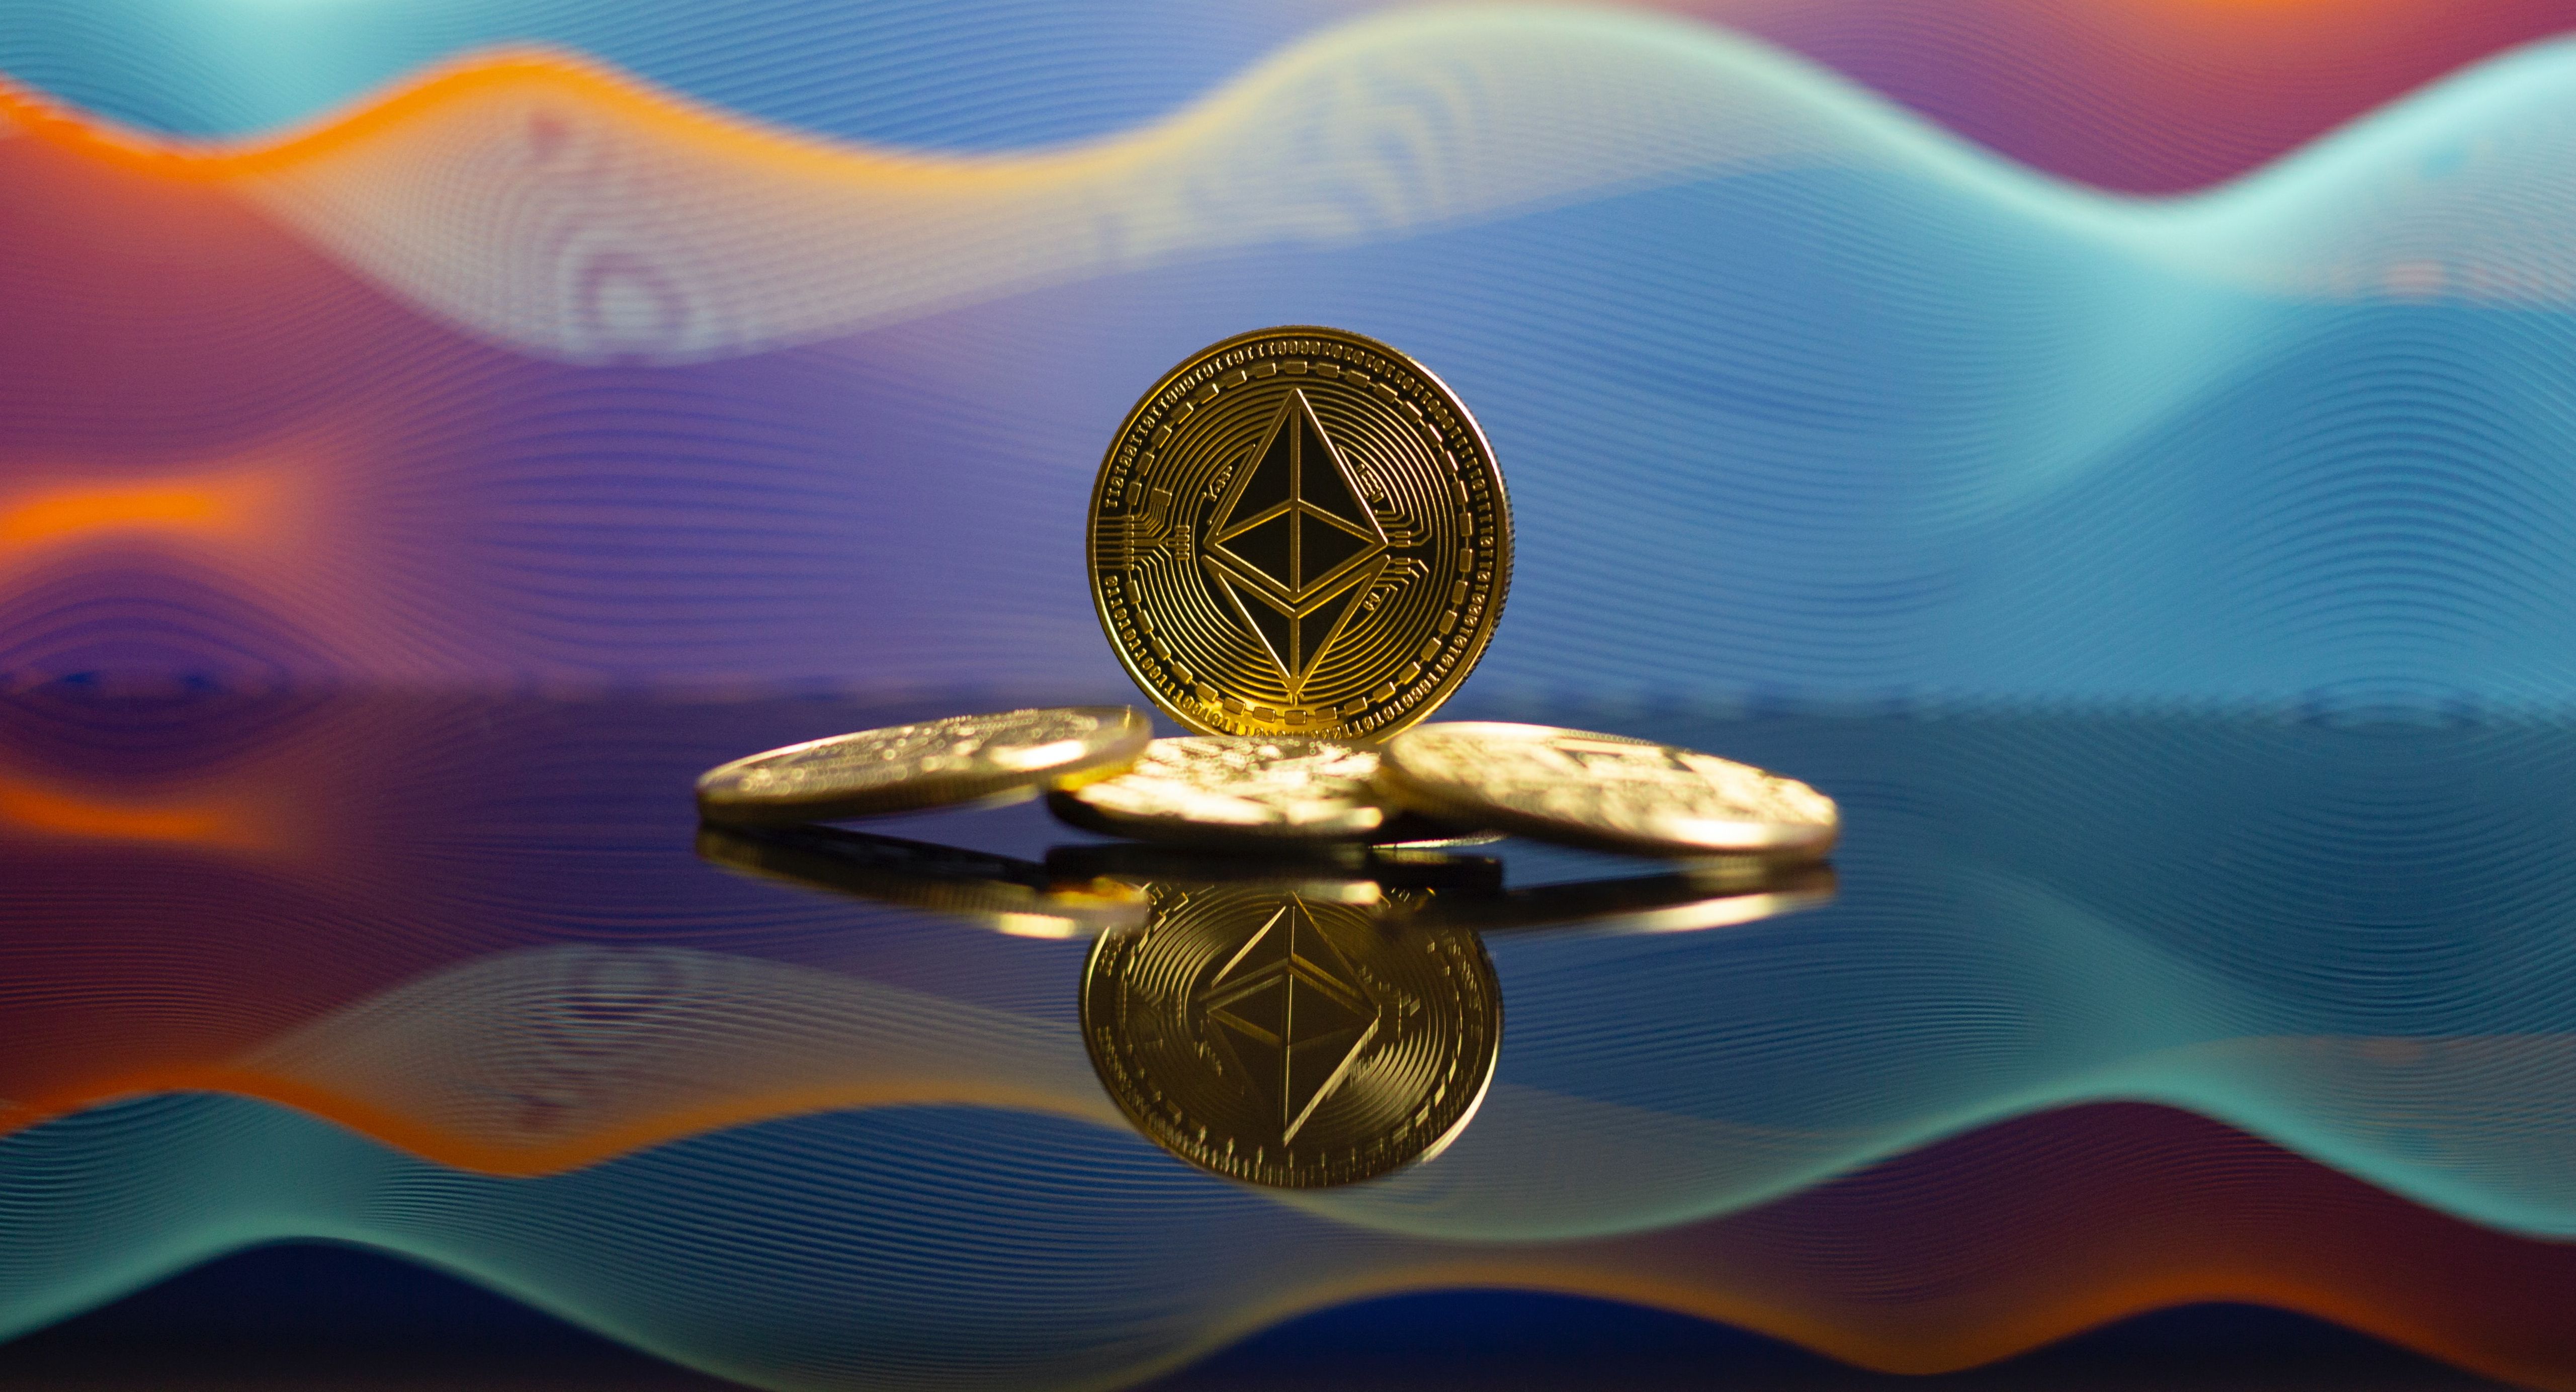 ethereum gold coins in front of wavy background